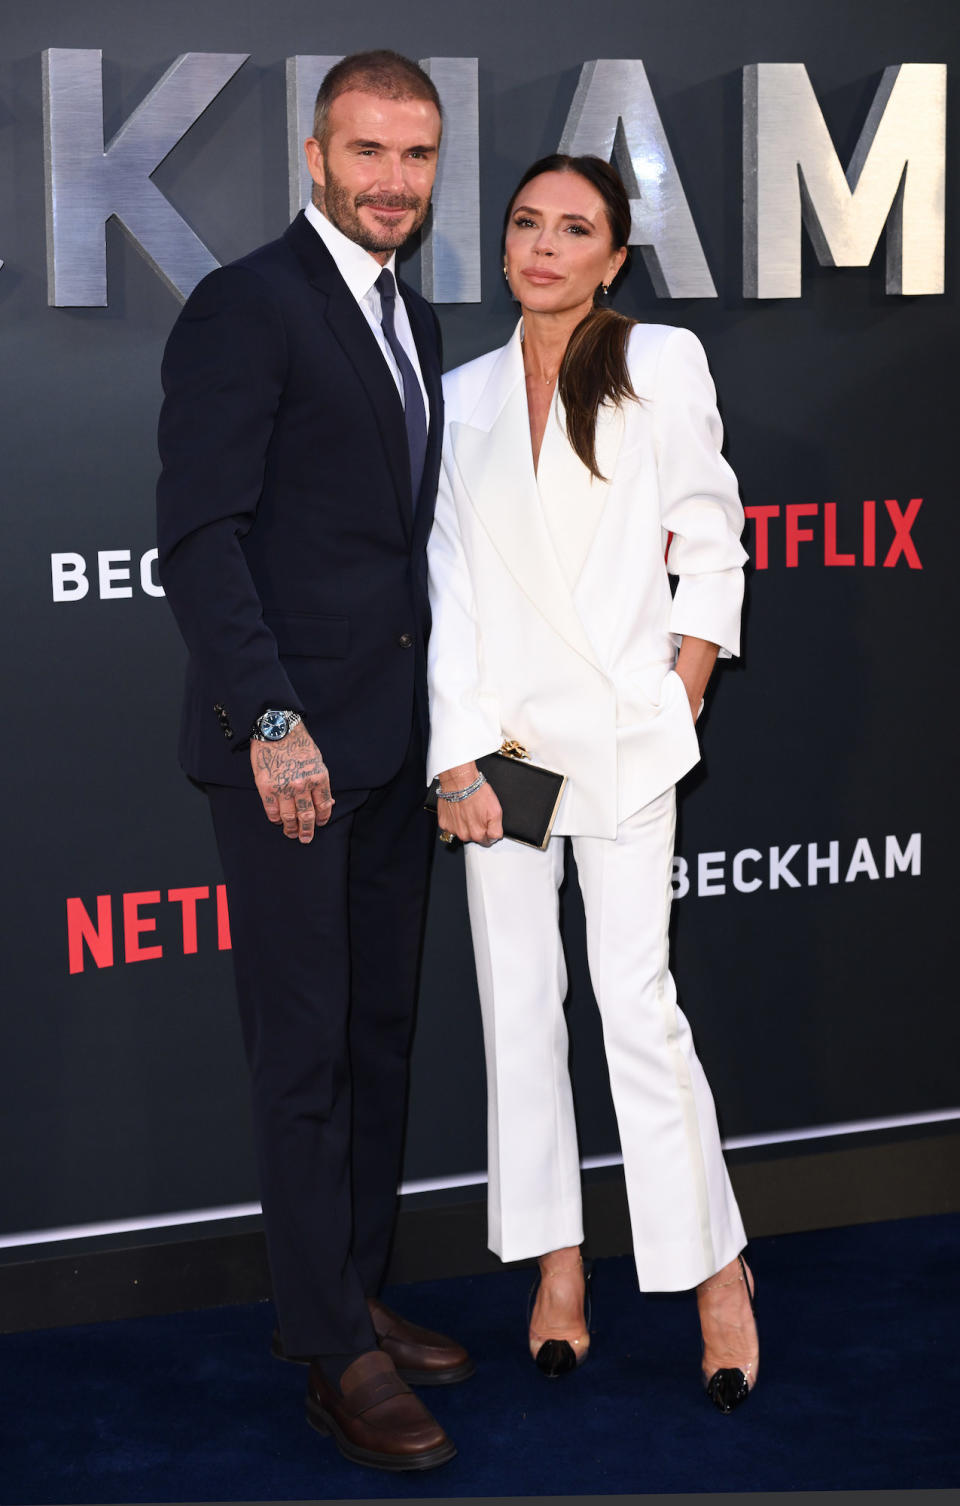 David Beckham Reveals His Morning Skincare Routine Using Wife Victoria Beckham s Products